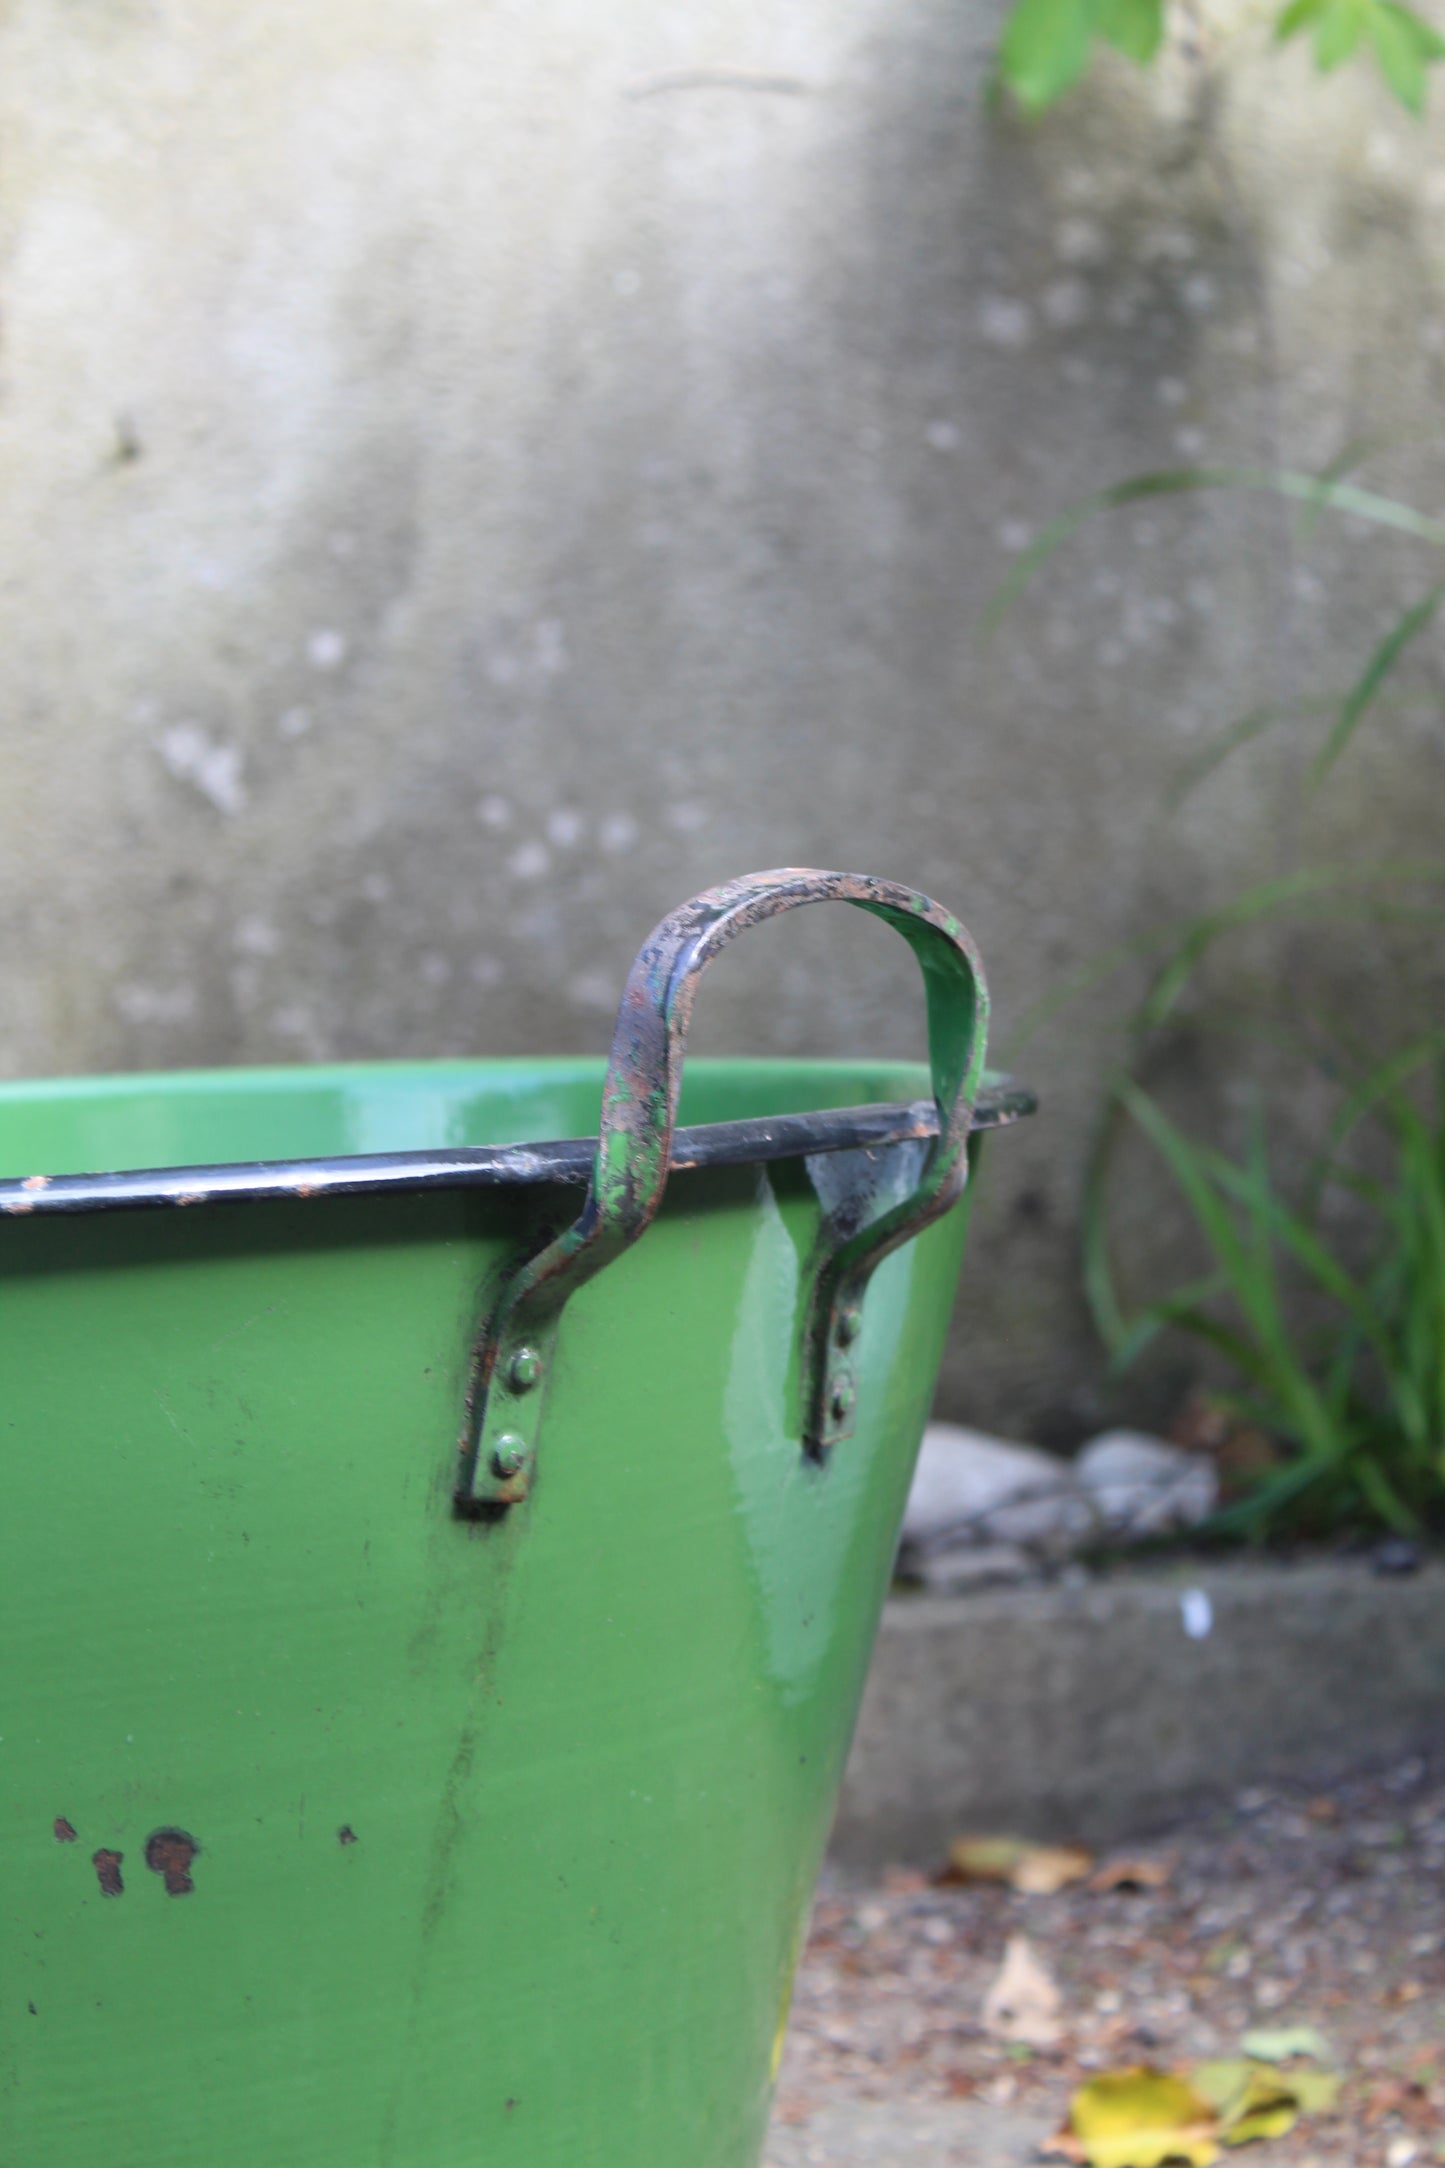 Vintage Enamel Planter in a Lovely Shade of Green